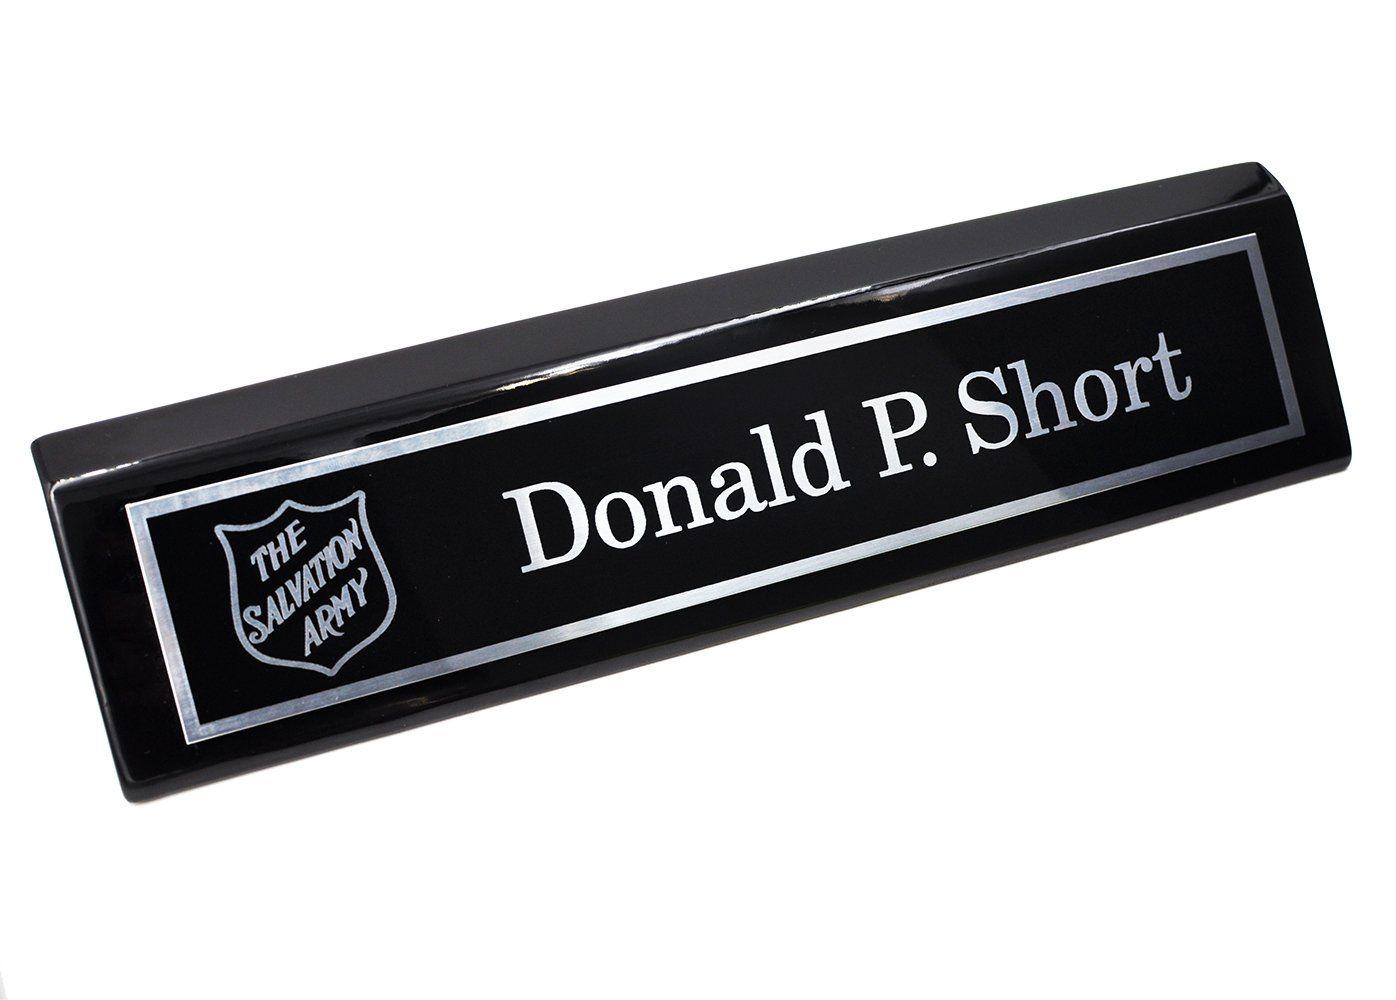 Engraved Logo - Amazon.com : Custom Desk Name Plate with Logo. Personalized Silver